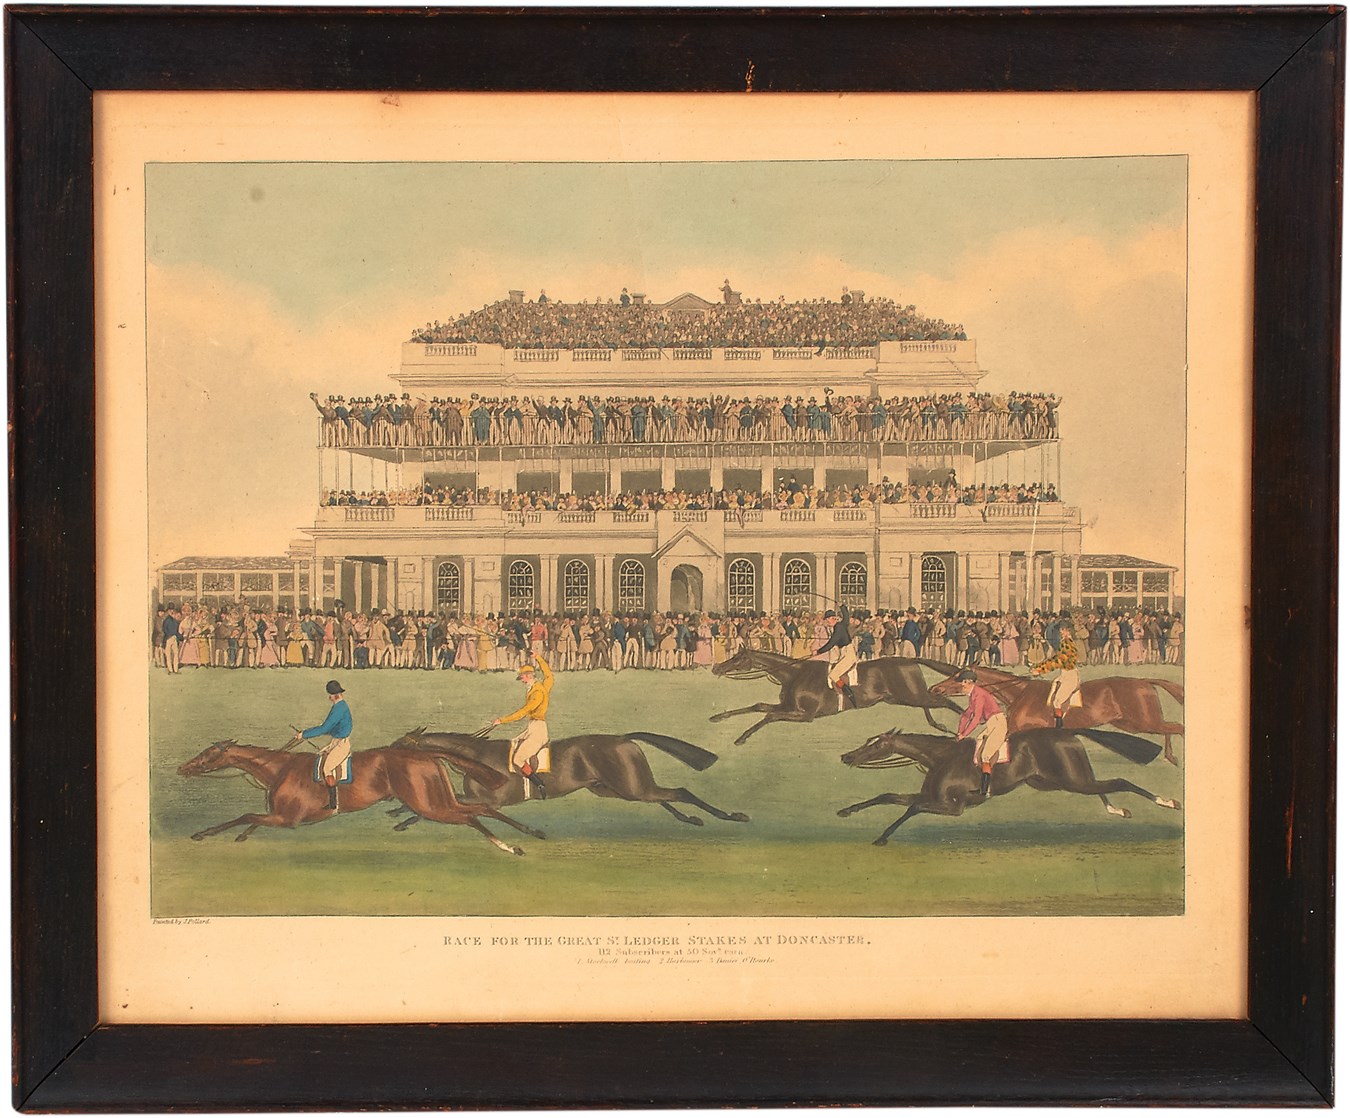 Circa 1852 "Race for the Great St. Ledger Stakes at Doncaster" Watercolor Aquatint by J. Pollard